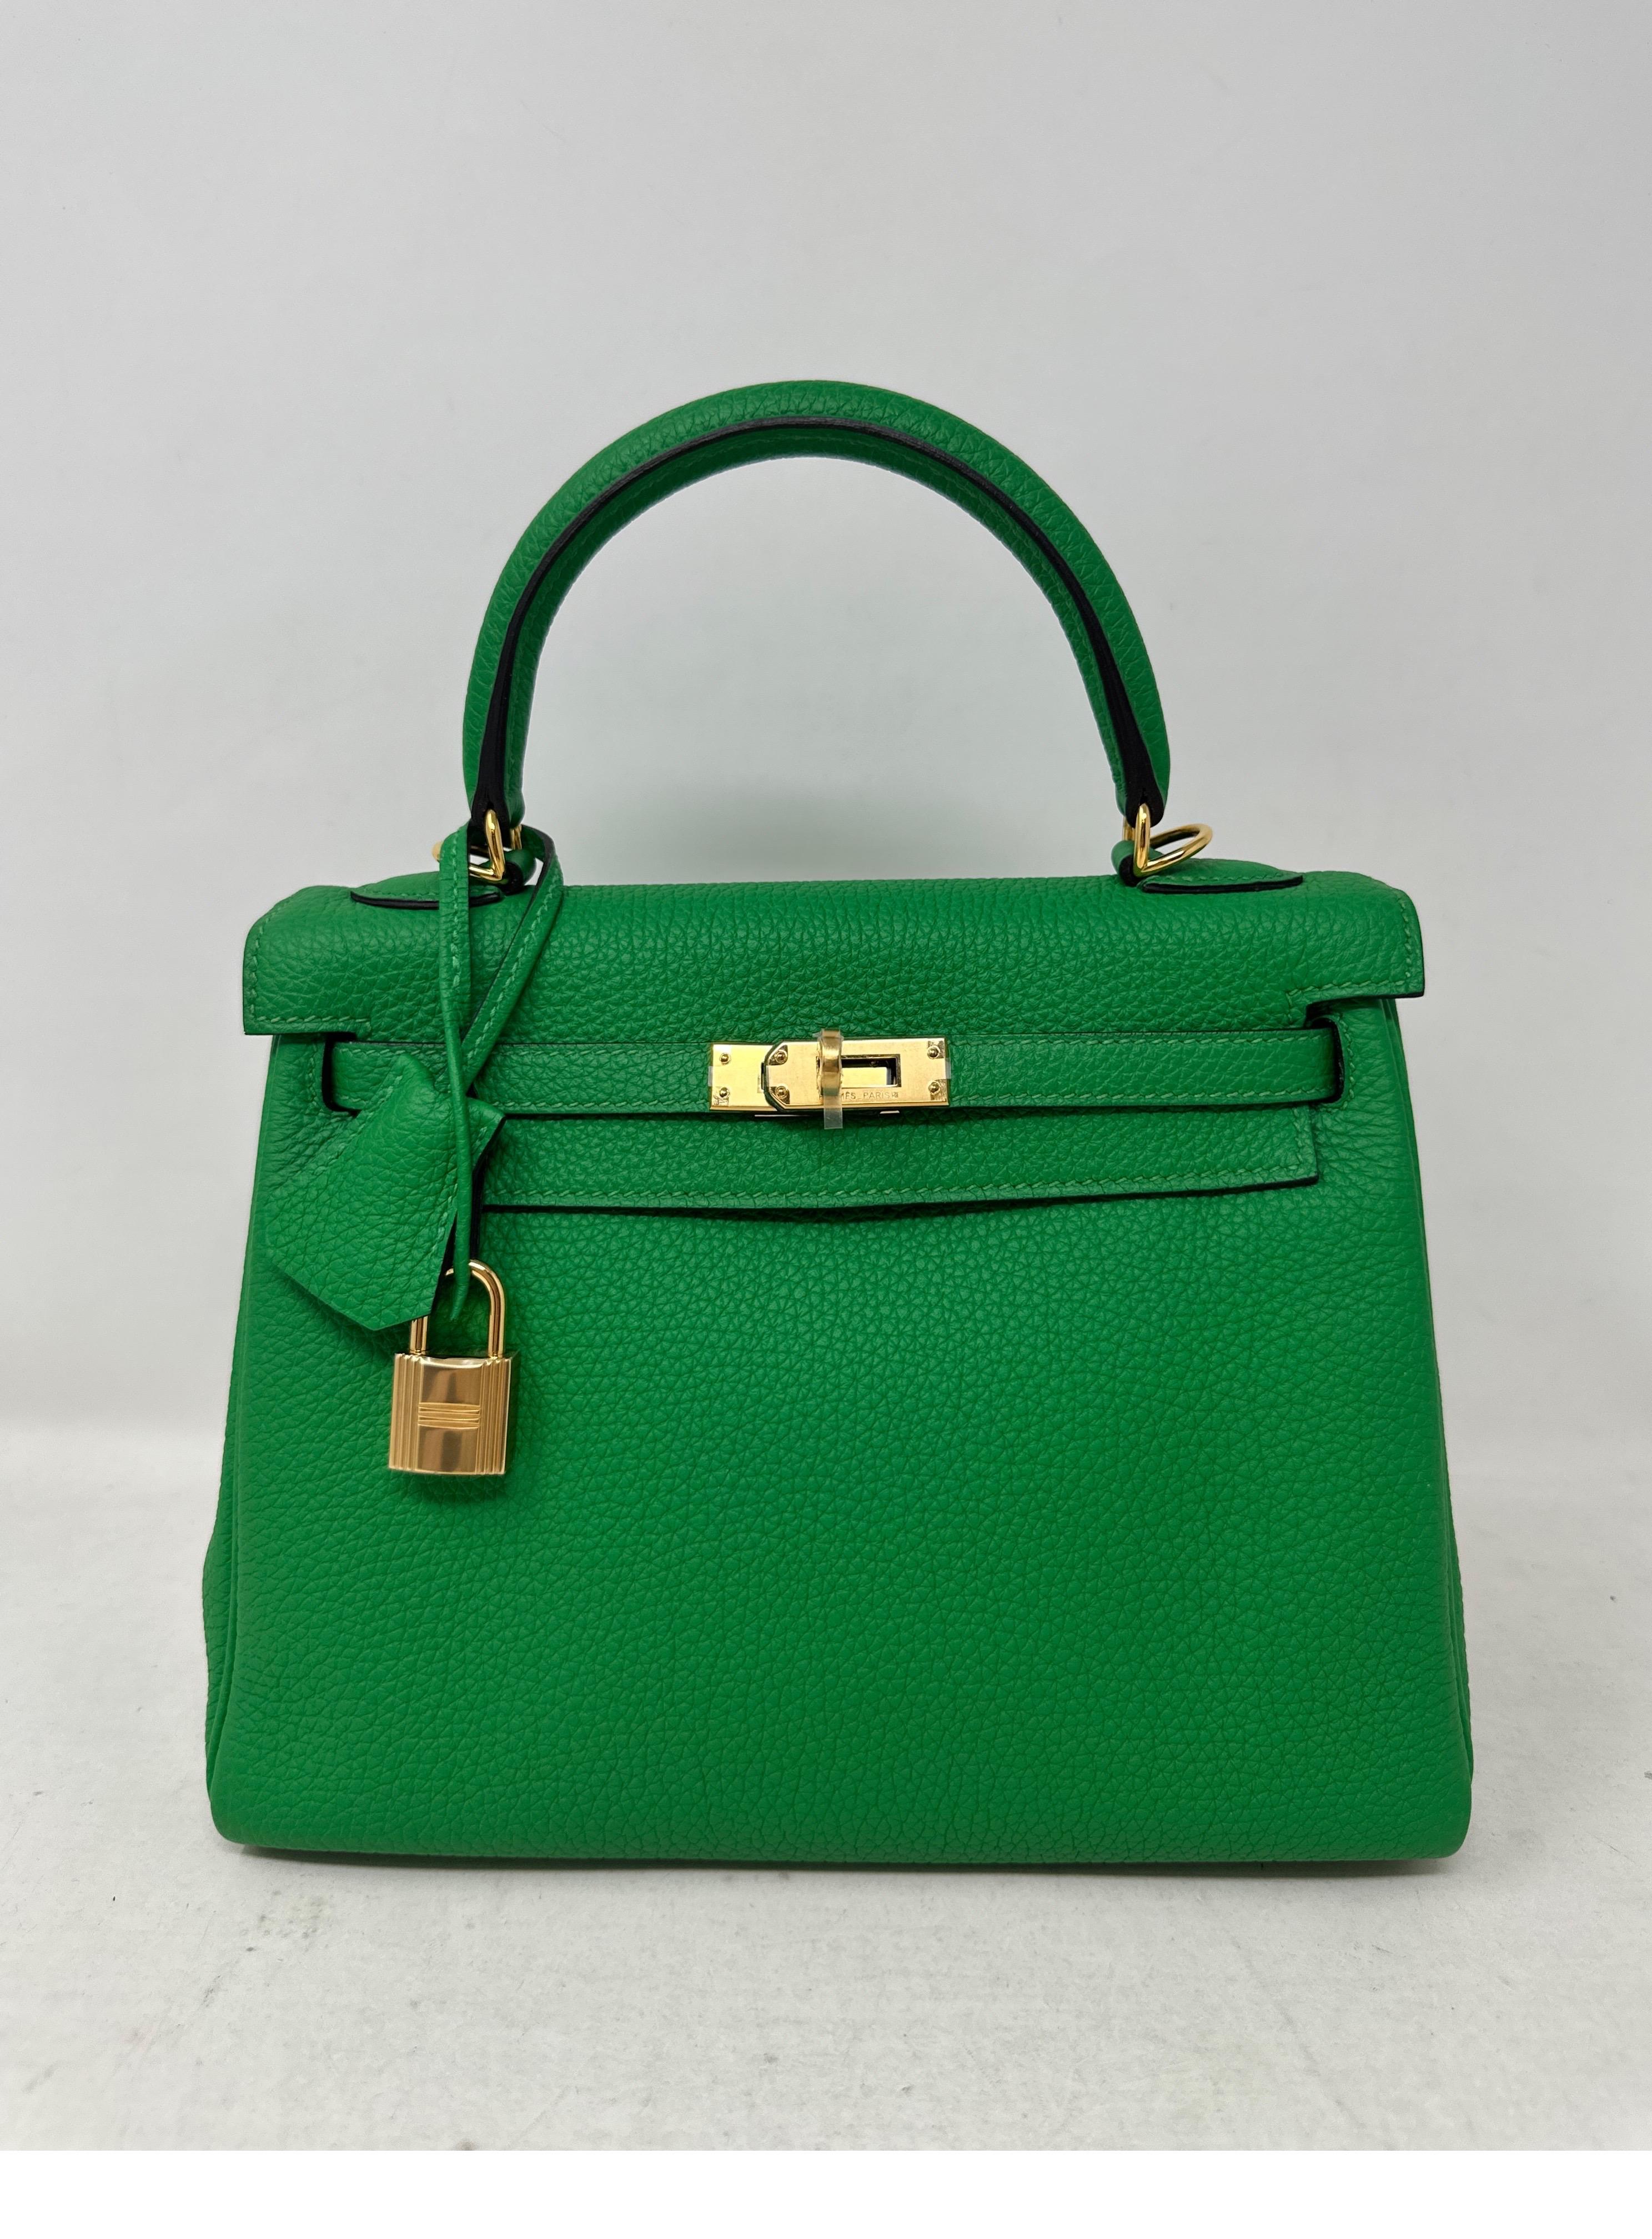 Hermes Bamboo Kelly 25 Bag. Togo leather. Excellent like new condition. Gold hardware. Rare size and color. Includes clochette, lock, keys, and dust bag. Guaranteed authentic. 